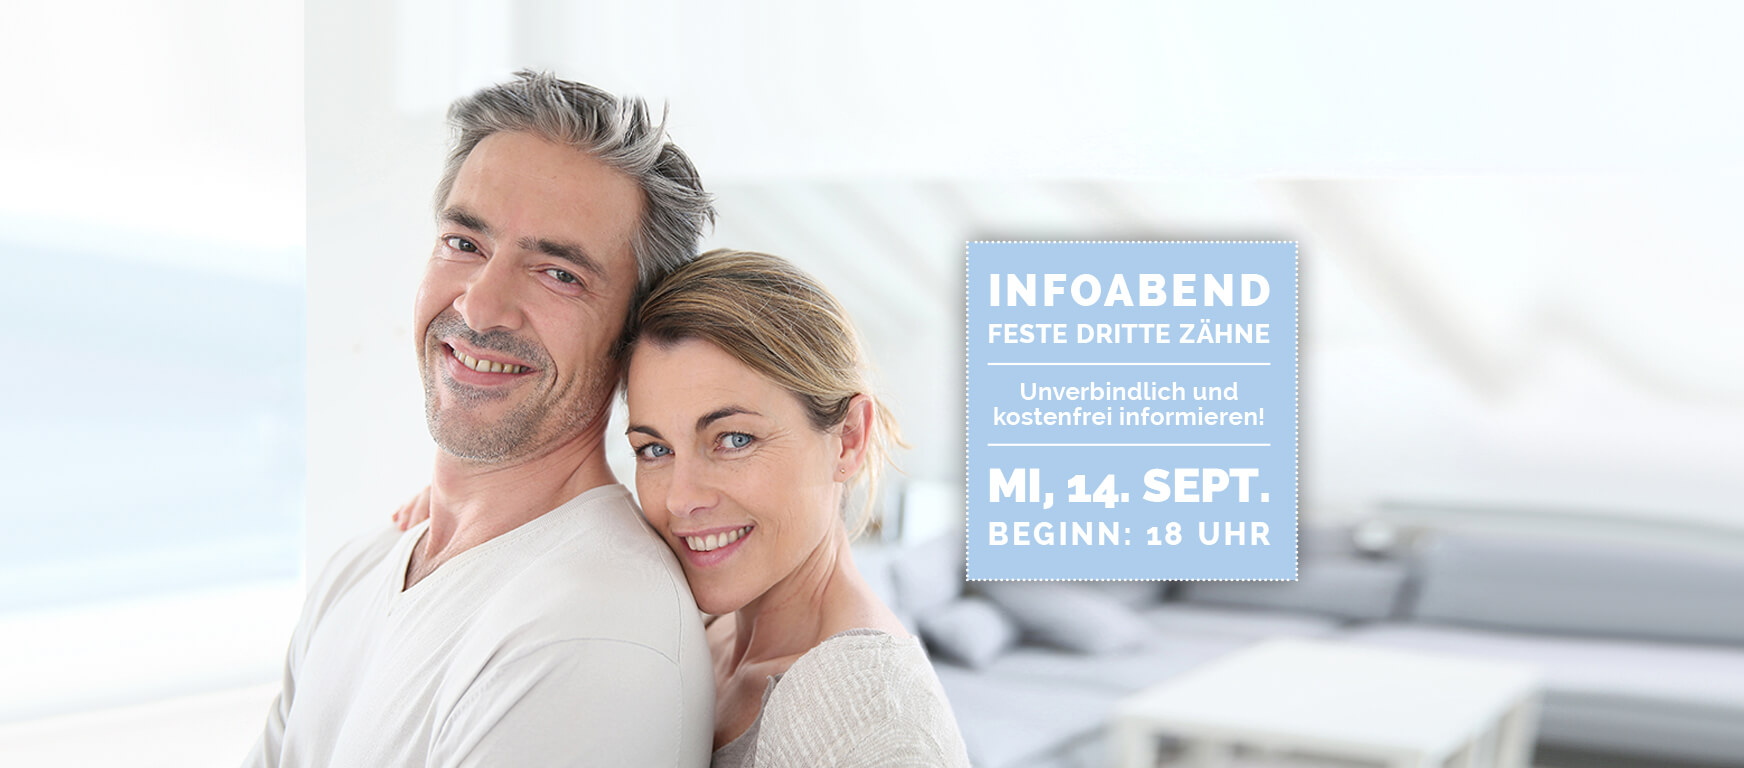 All-on-4 Infoabend